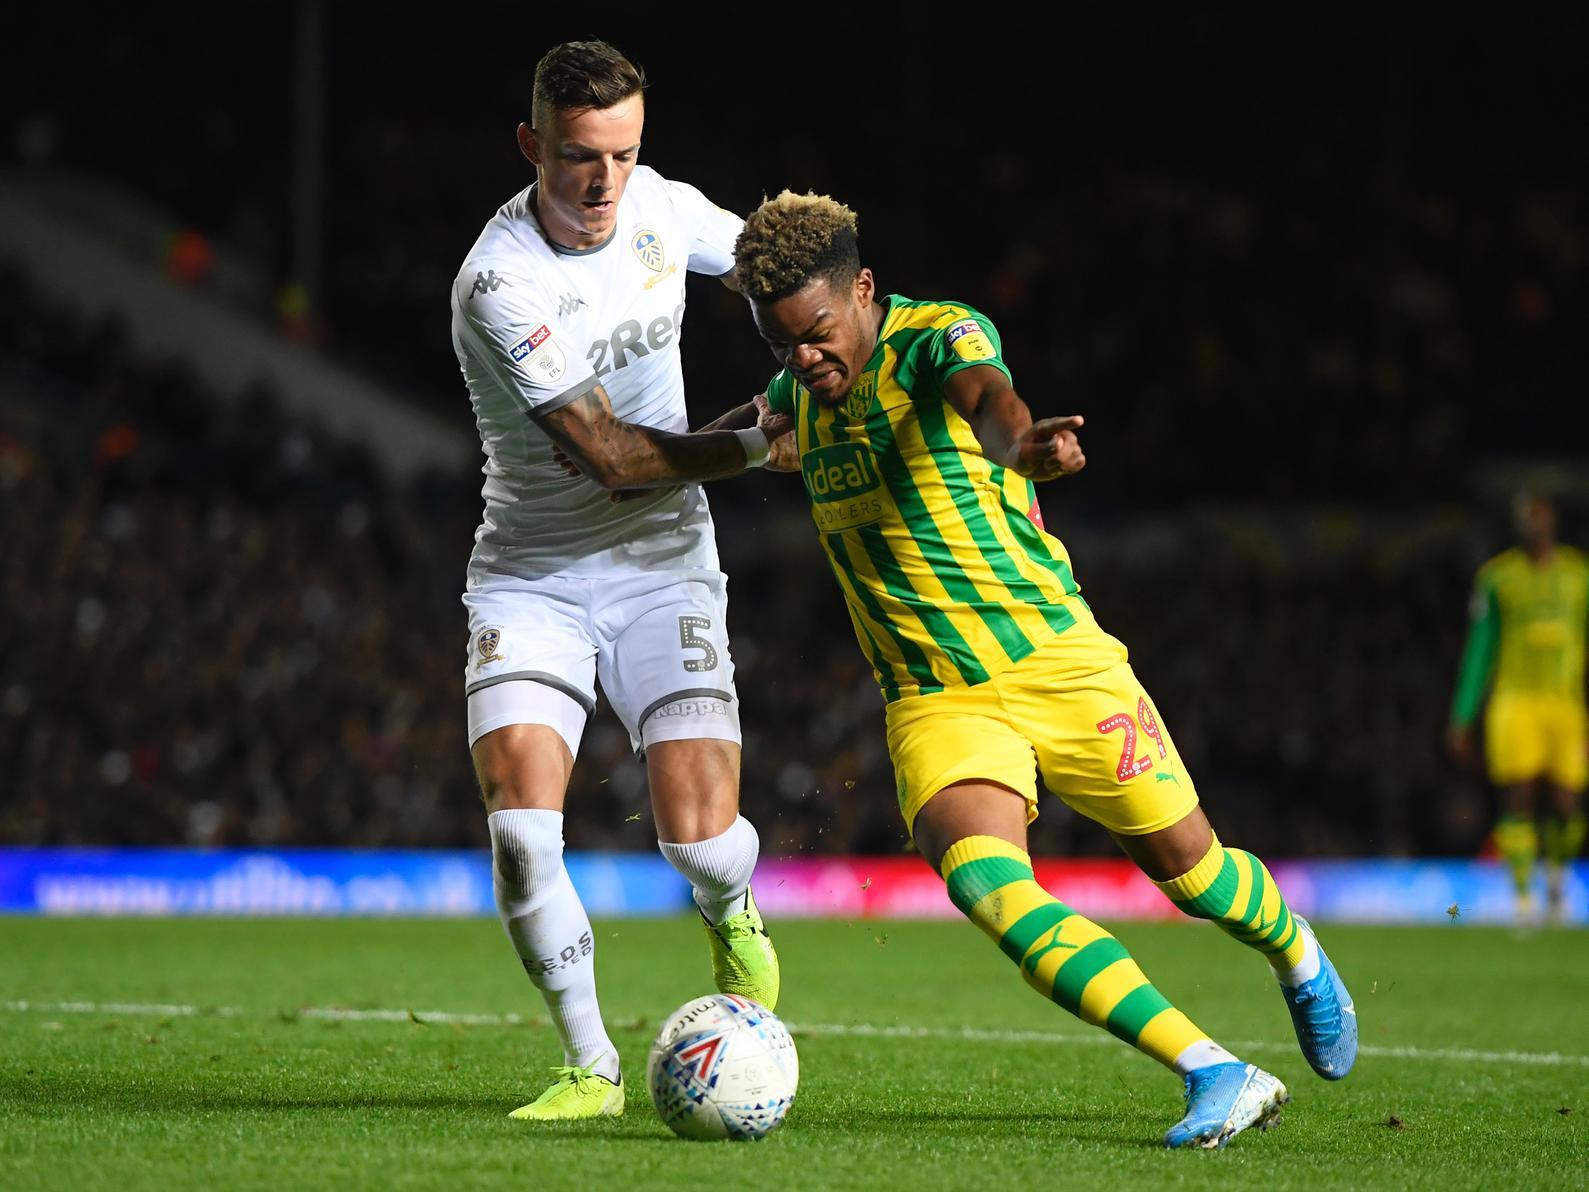 Leeds United are set to keep star loanee Ben White until the end of the season, as Brighton are unable to recall him in January - due to the vast number of minutes he's played for the Whites so far this season. (Yorkshire Evening Post)